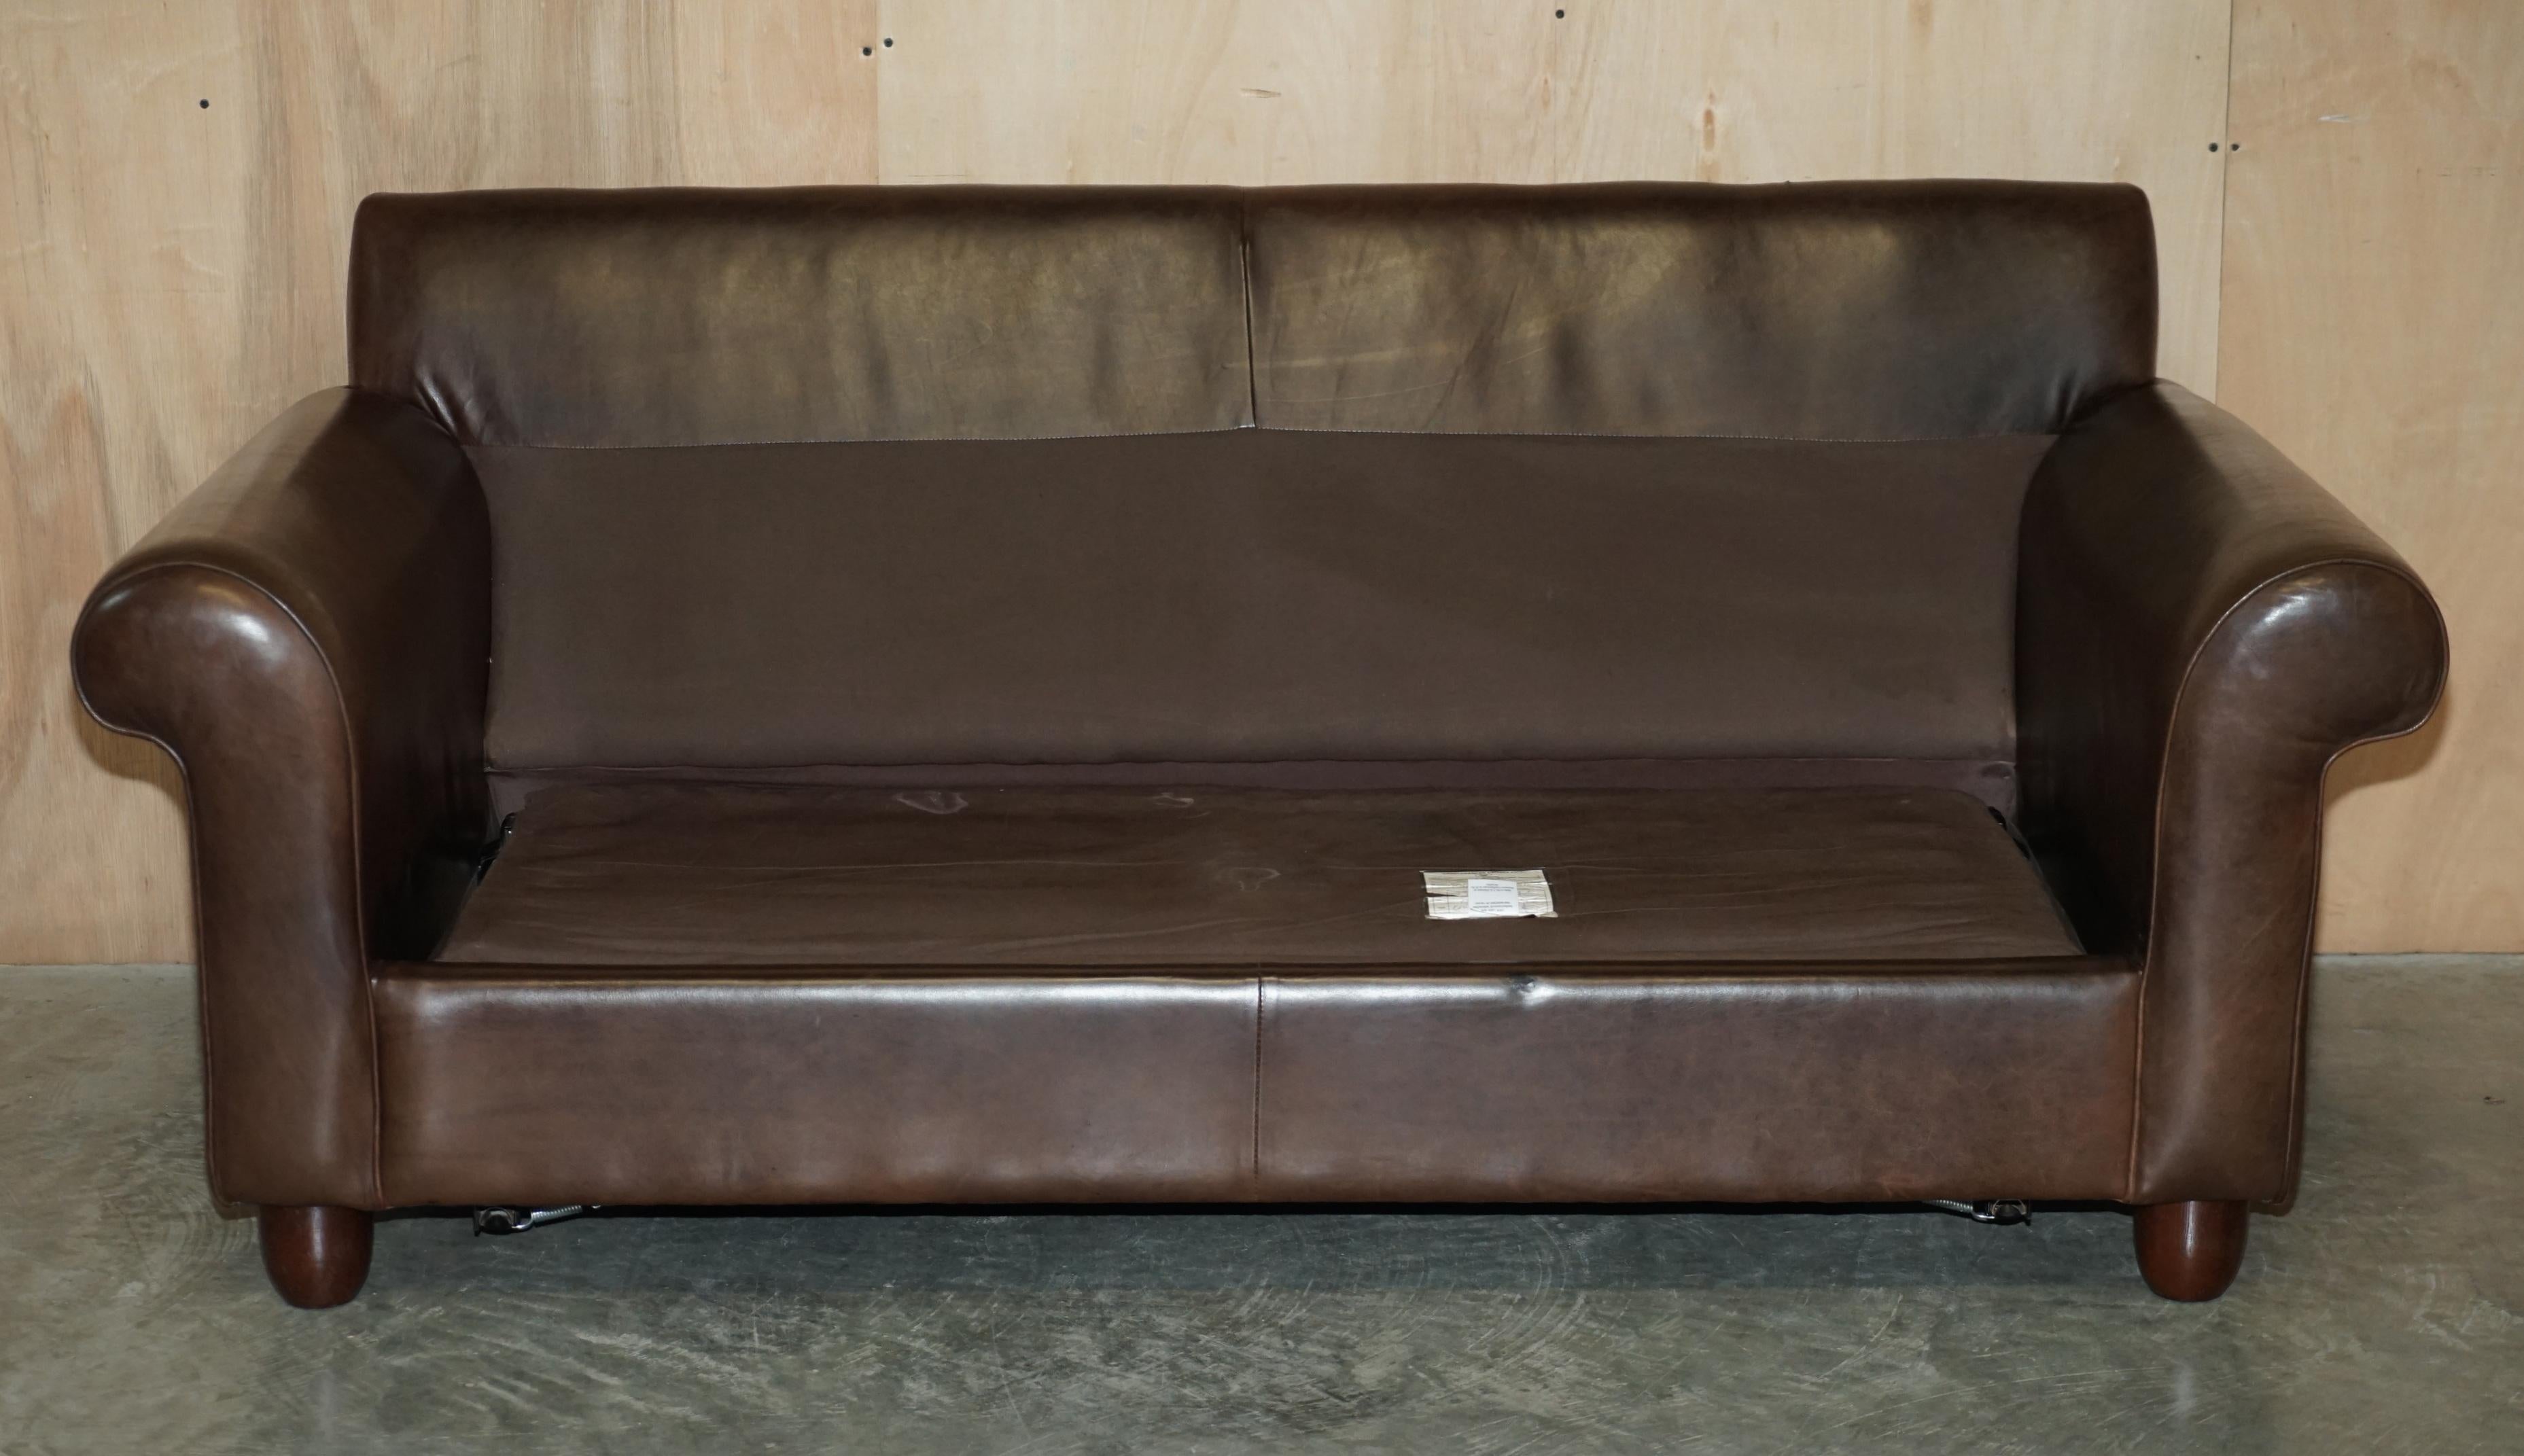 LOVELY HERITAGE BROWN LEATHER LAURA ASHLEY MORTIMER SOFABED IN SEHR GUTEM ZUSTAND im Angebot 7